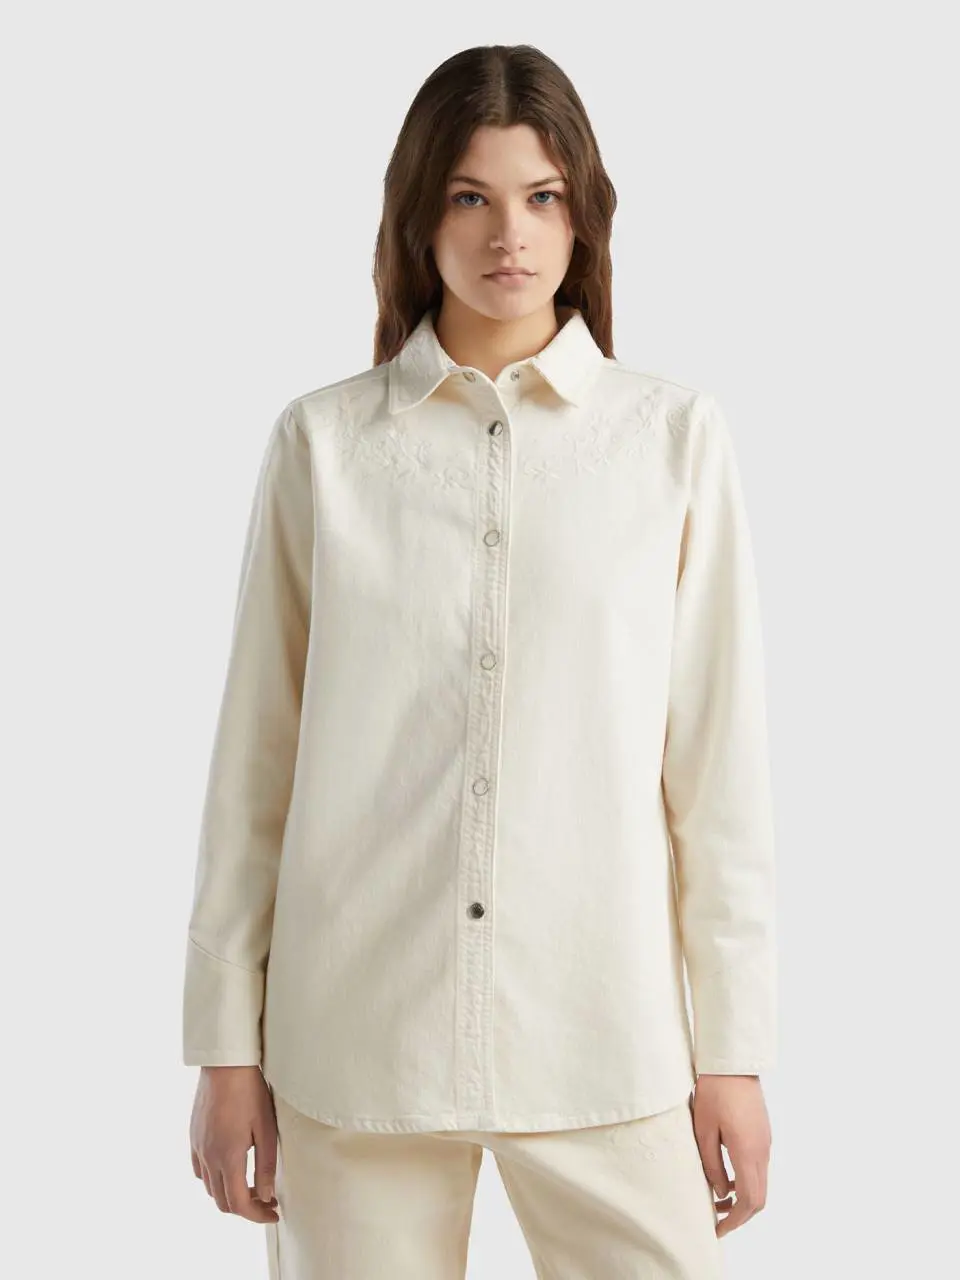 Benetton oversized shirt with floral embroidery. 1